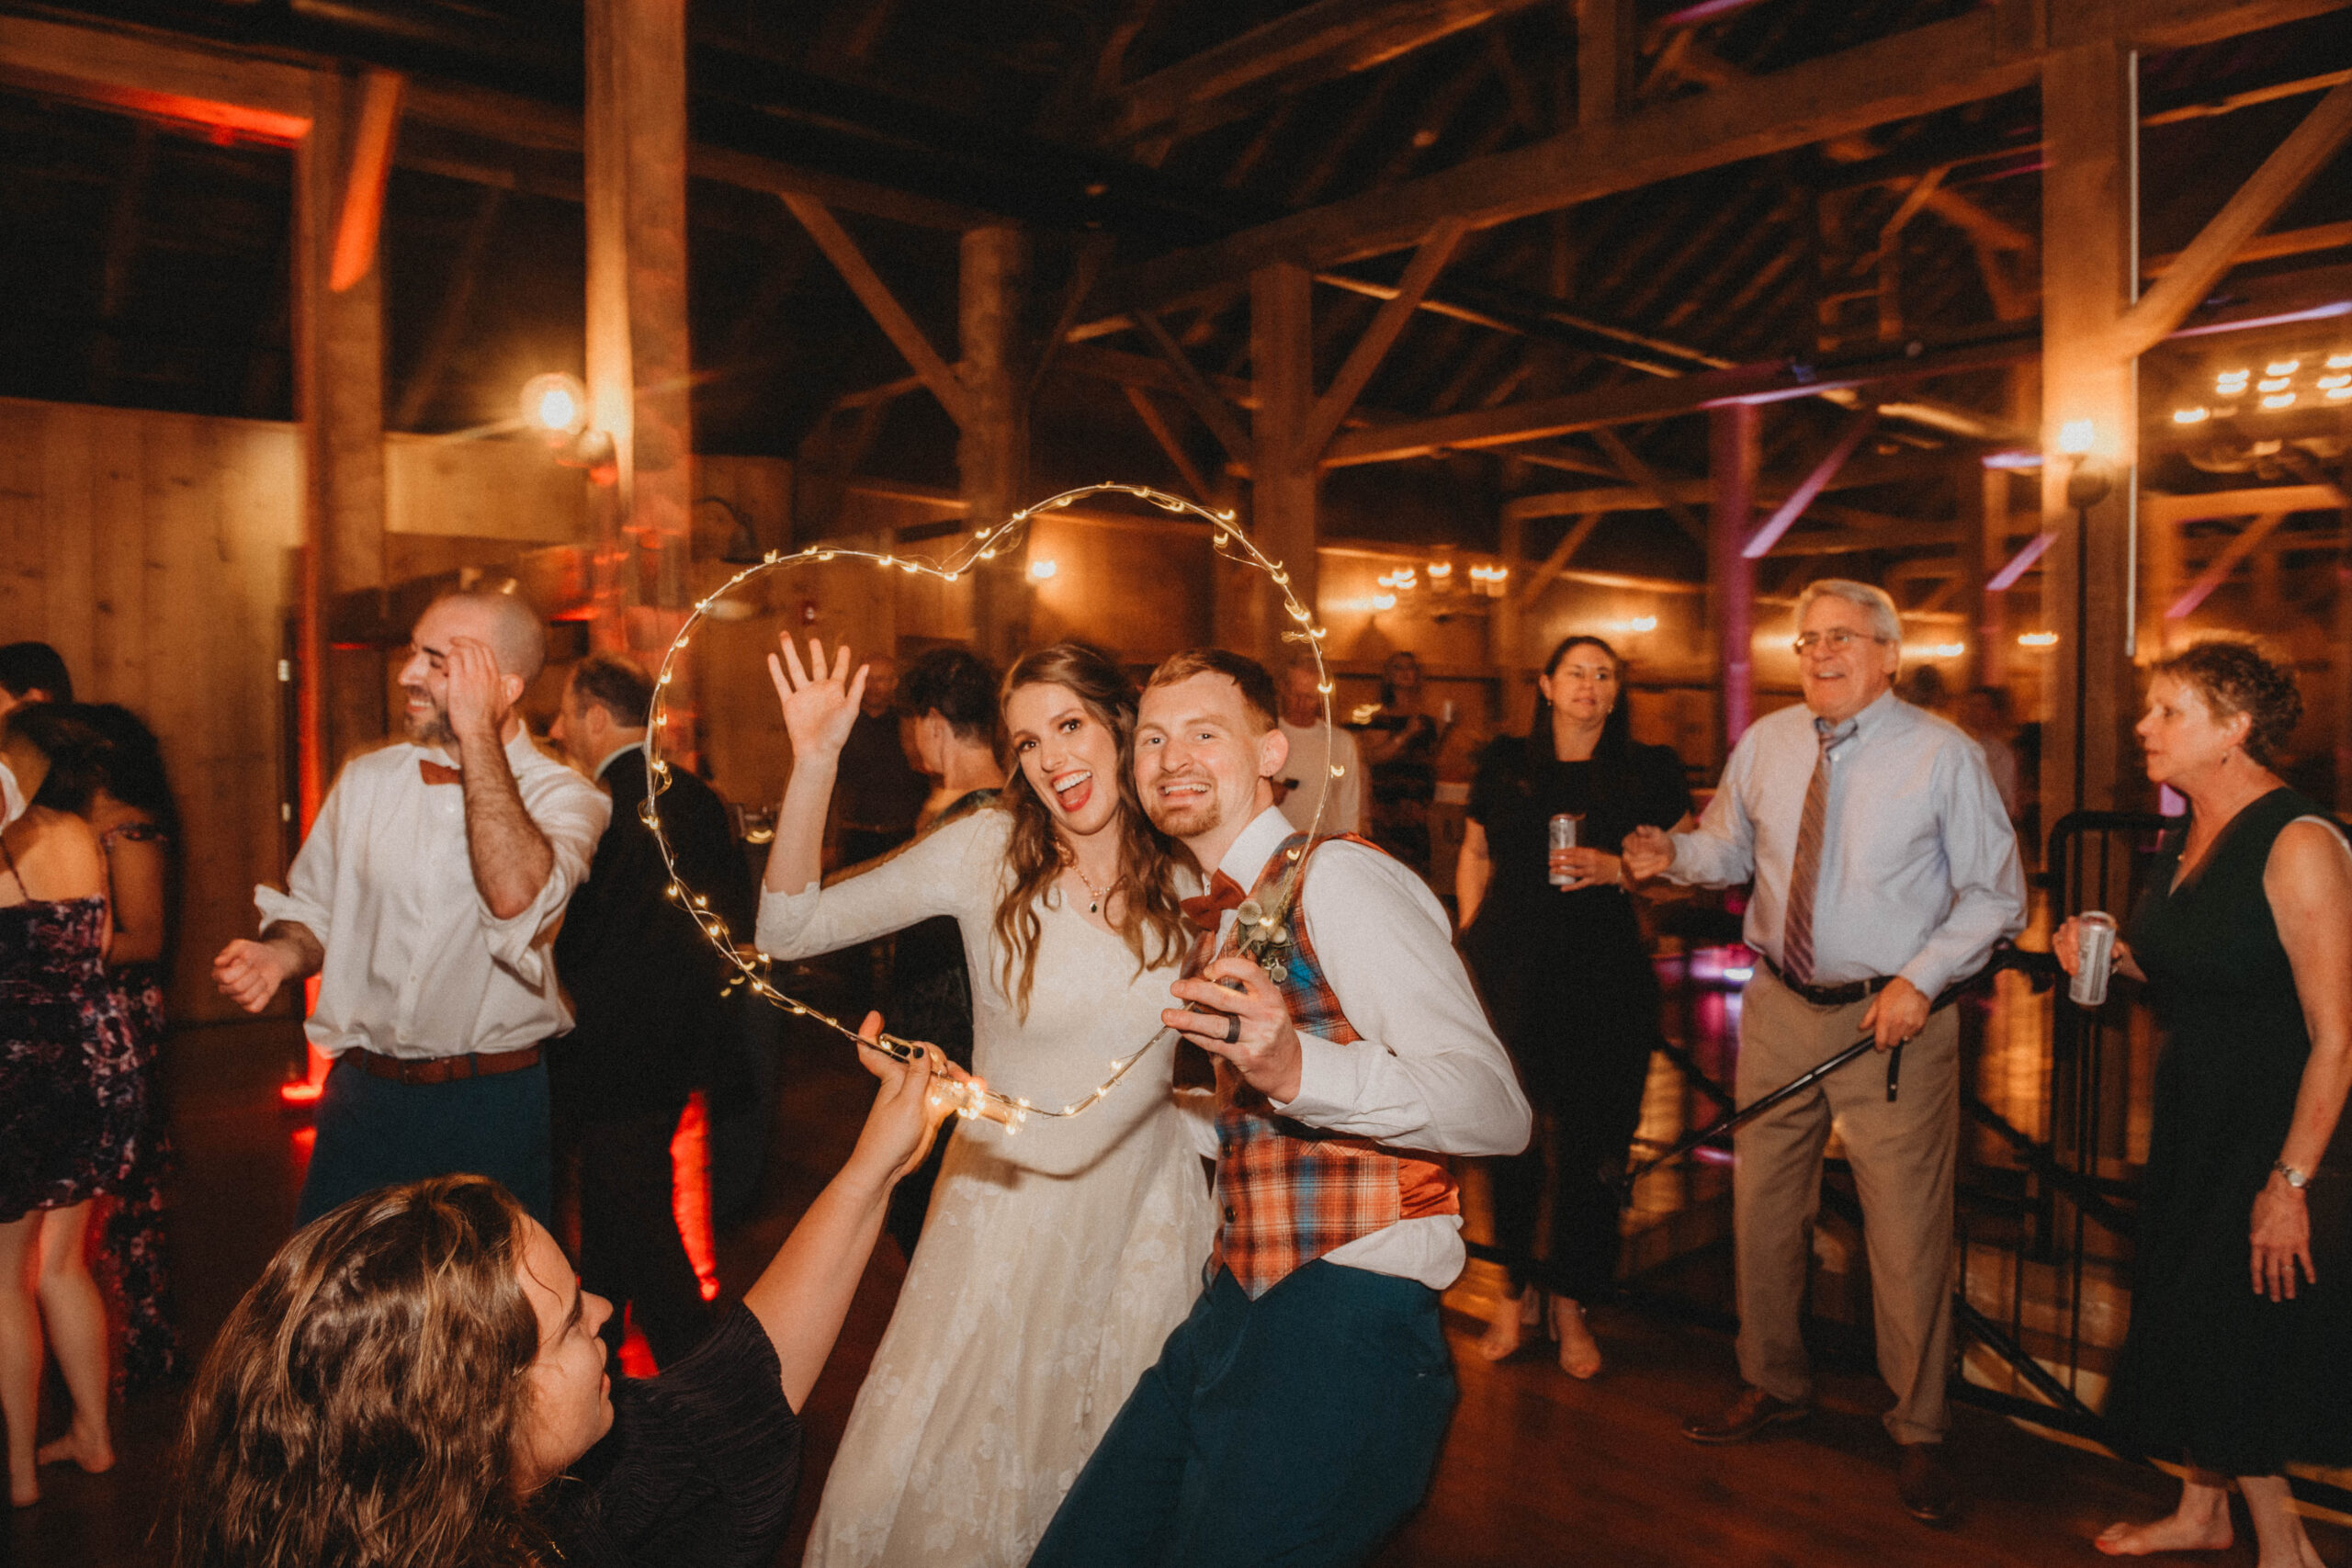 Emily and Sean together on the barn dance floor holding a string light heart